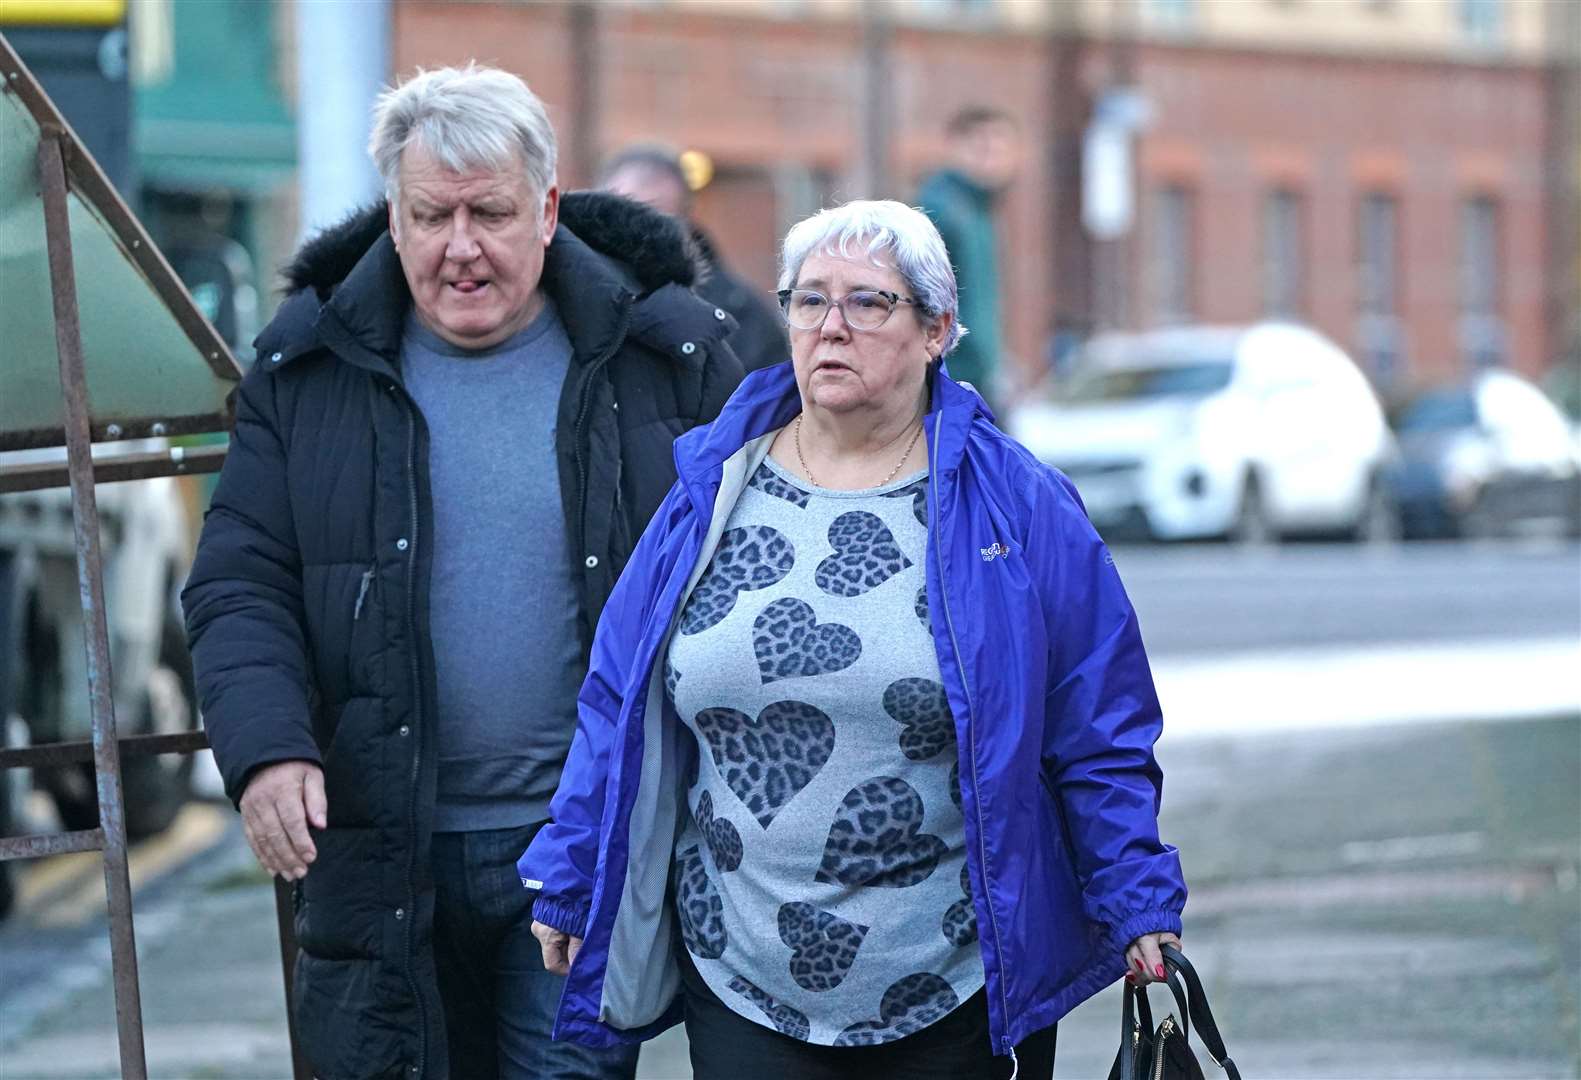 Caroline Glachan’s mother Margaret McKeich said the convictions marked a ‘great day’ (Andrew Milligan/PA)